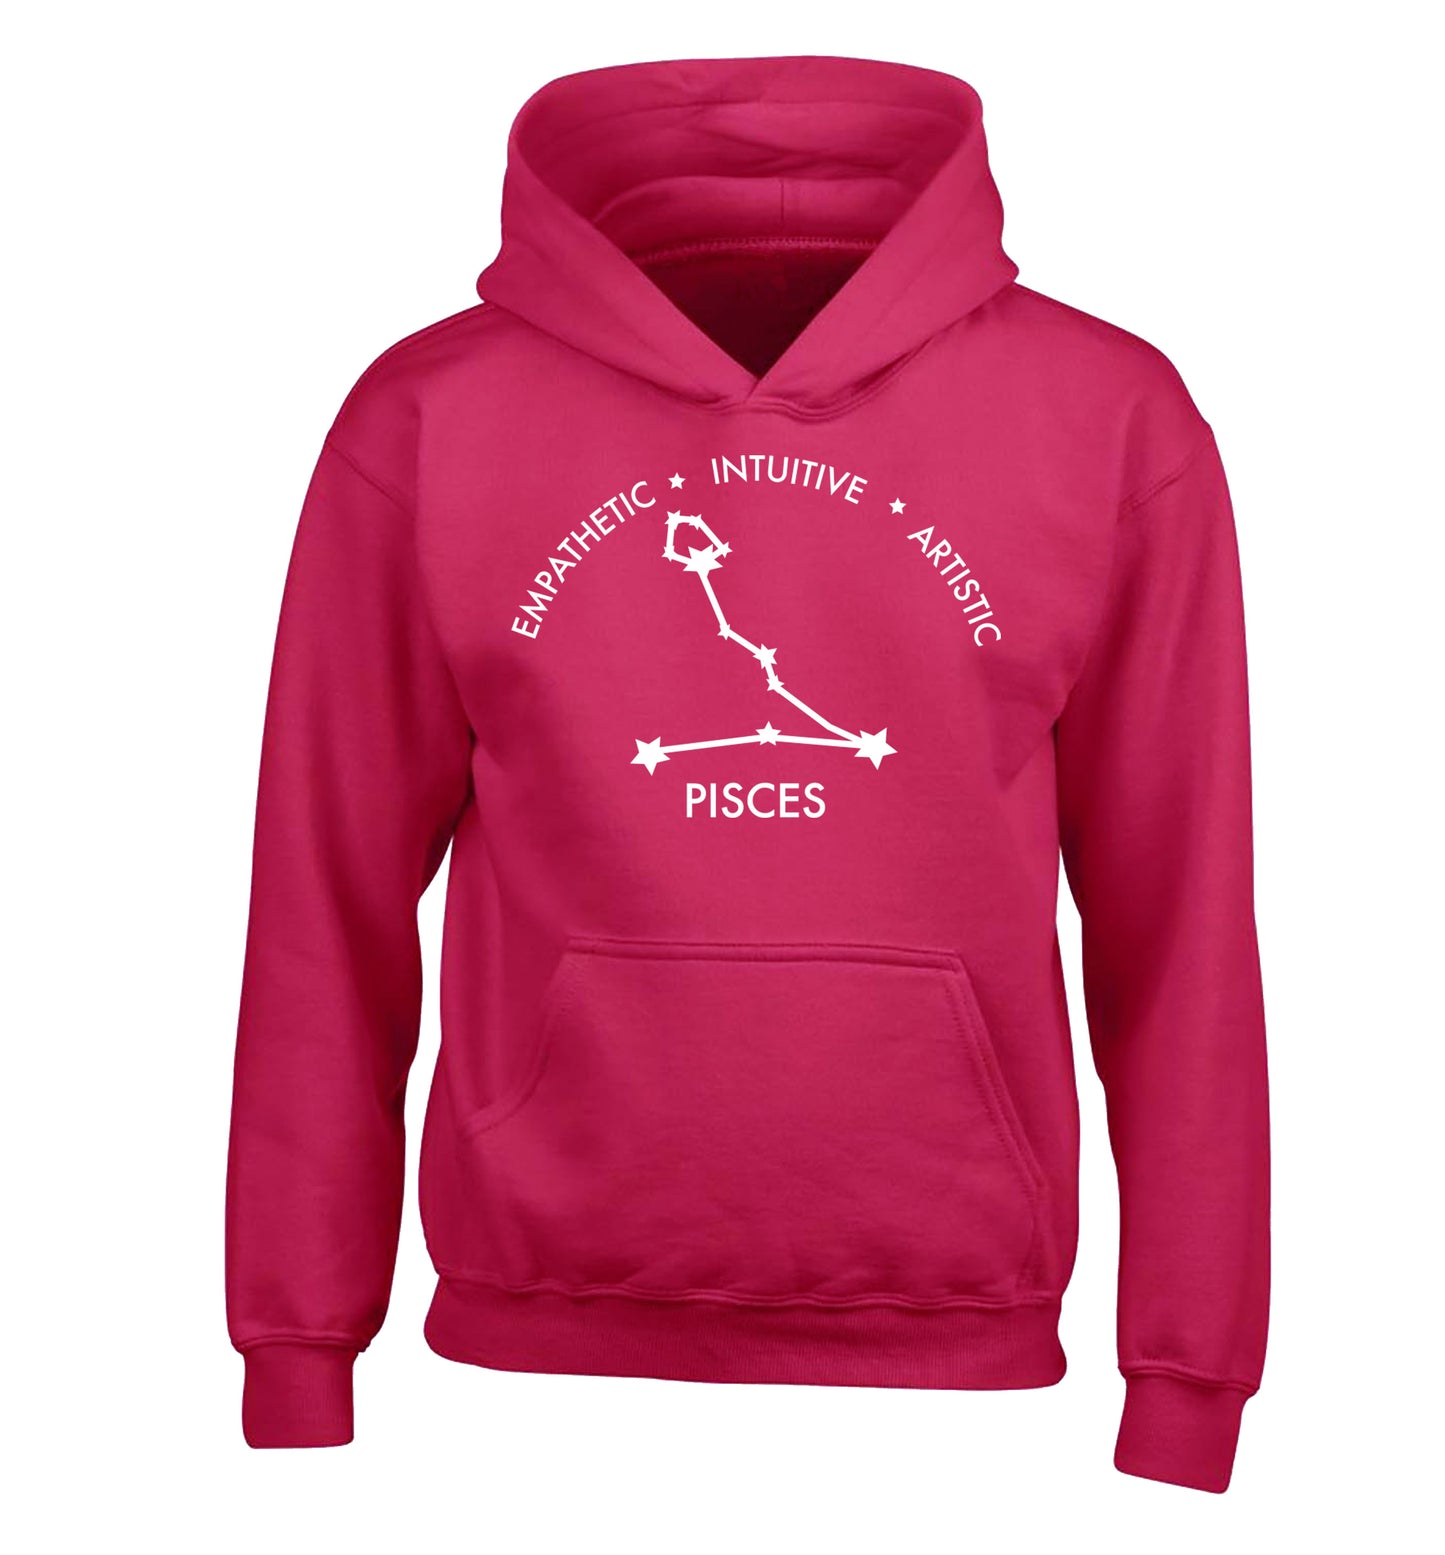 Capricorn: Ambitious | Patient | Gracious children's pink hoodie 12-13 Years